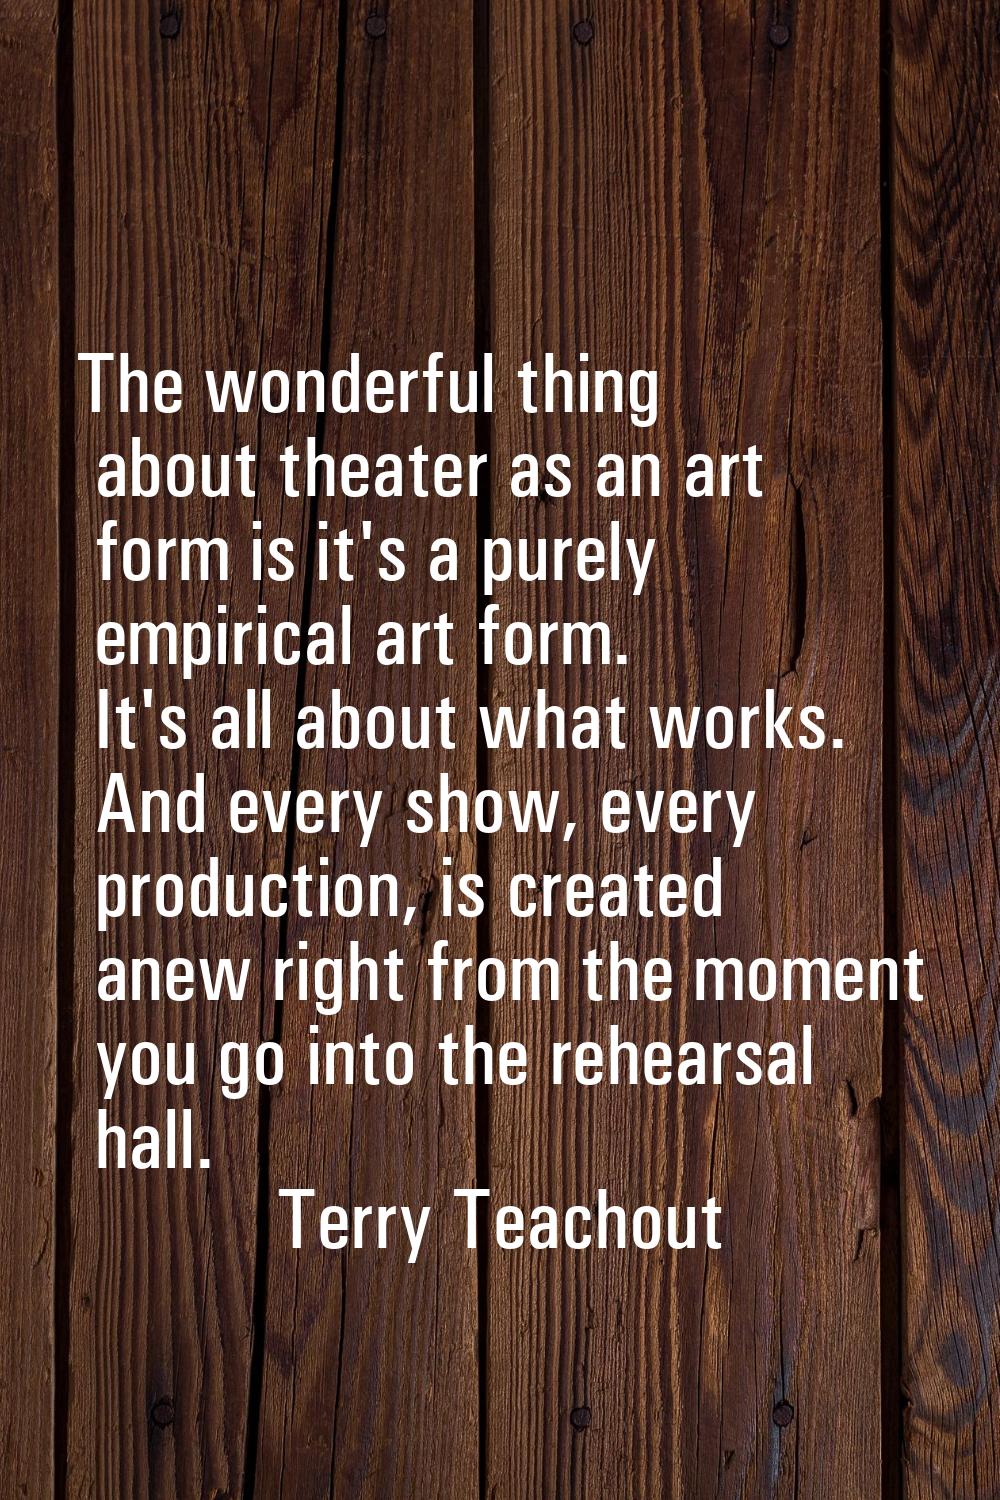 The wonderful thing about theater as an art form is it's a purely empirical art form. It's all abou